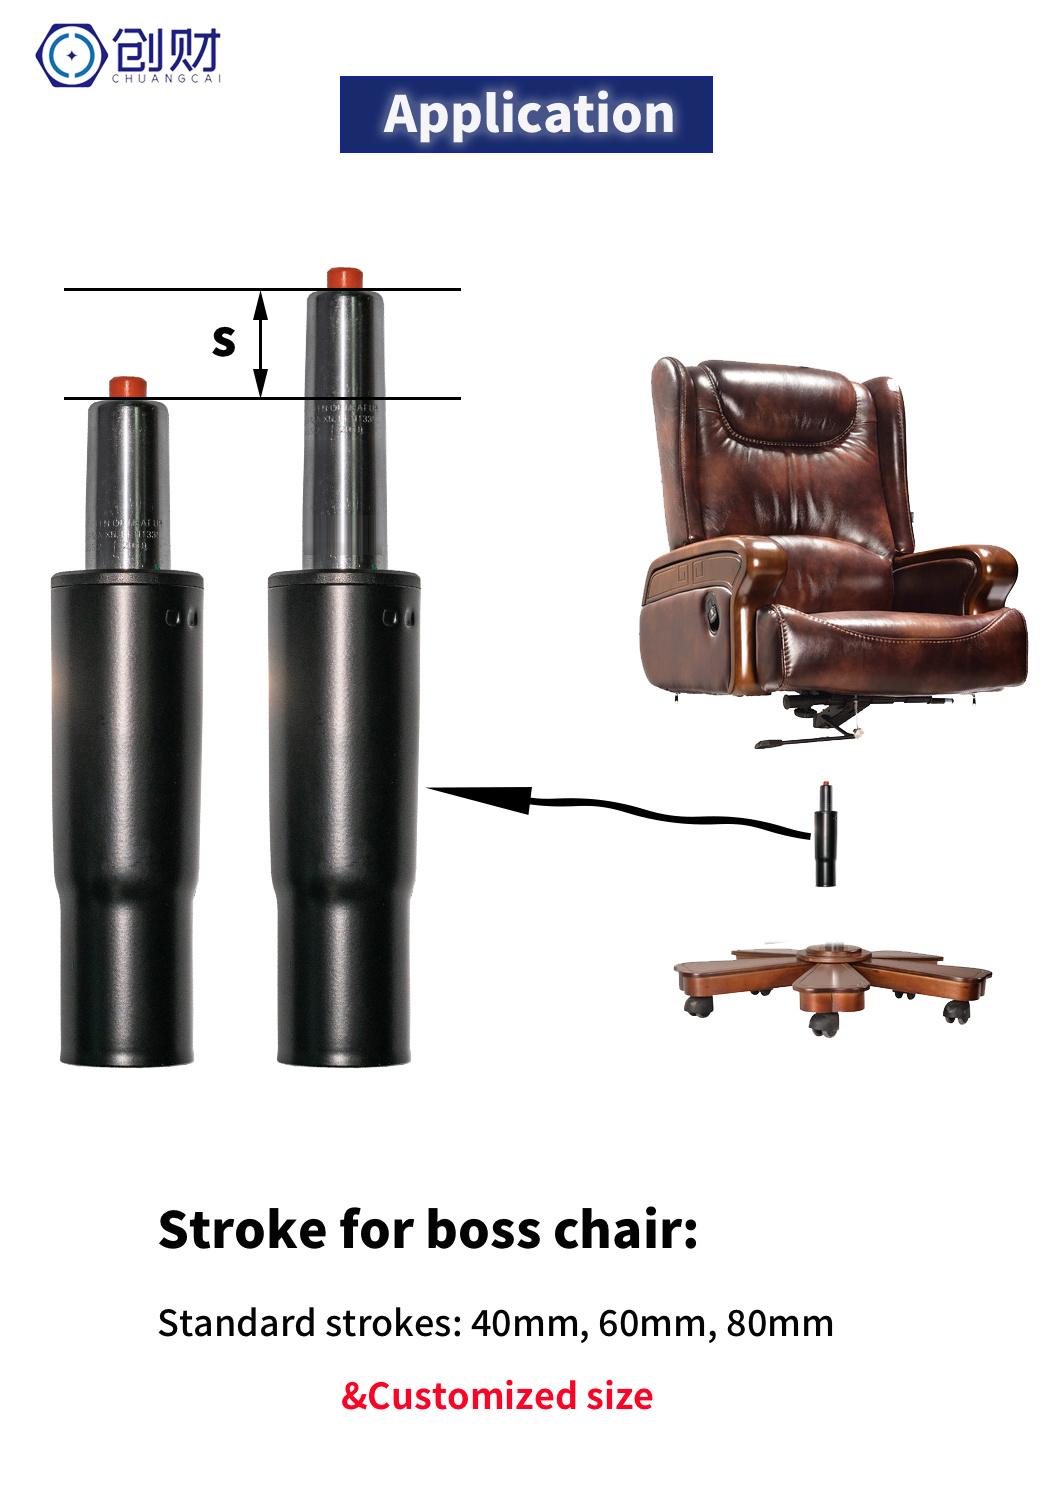 Supported Lift Using Durable Gas Spring for Office Chair